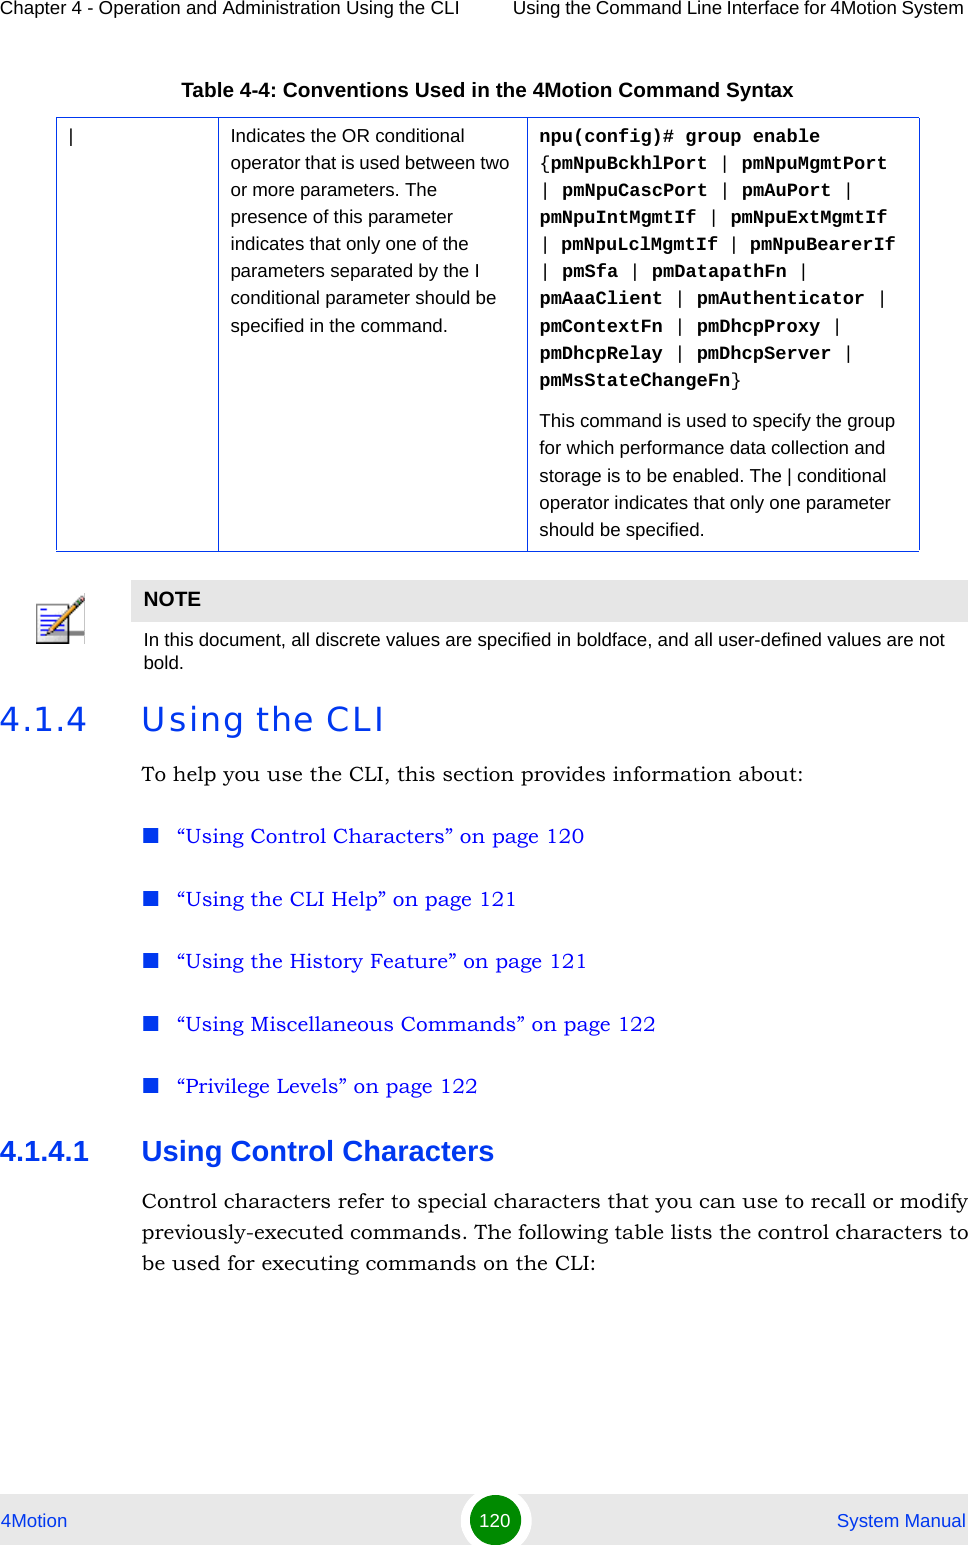 Chapter 4 - Operation and Administration Using the CLI Using the Command Line Interface for 4Motion System 4Motion 120  System Manual4.1.4 Using the CLITo help you use the CLI, this section provides information about:“Using Control Characters” on page 120“Using the CLI Help” on page 121“Using the History Feature” on page 121“Using Miscellaneous Commands” on page 122“Privilege Levels” on page 1224.1.4.1 Using Control CharactersControl characters refer to special characters that you can use to recall or modify previously-executed commands. The following table lists the control characters to be used for executing commands on the CLI:| Indicates the OR conditional operator that is used between two or more parameters. The presence of this parameter indicates that only one of the parameters separated by the I conditional parameter should be specified in the command.npu(config)# group enable {pmNpuBckhlPort | pmNpuMgmtPort | pmNpuCascPort | pmAuPort | pmNpuIntMgmtIf | pmNpuExtMgmtIf | pmNpuLclMgmtIf | pmNpuBearerIf | pmSfa | pmDatapathFn | pmAaaClient | pmAuthenticator | pmContextFn | pmDhcpProxy | pmDhcpRelay | pmDhcpServer | pmMsStateChangeFn}This command is used to specify the group for which performance data collection and storage is to be enabled. The | conditional operator indicates that only one parameter should be specified.NOTEIn this document, all discrete values are specified in boldface, and all user-defined values are not bold.Table 4-4: Conventions Used in the 4Motion Command Syntax